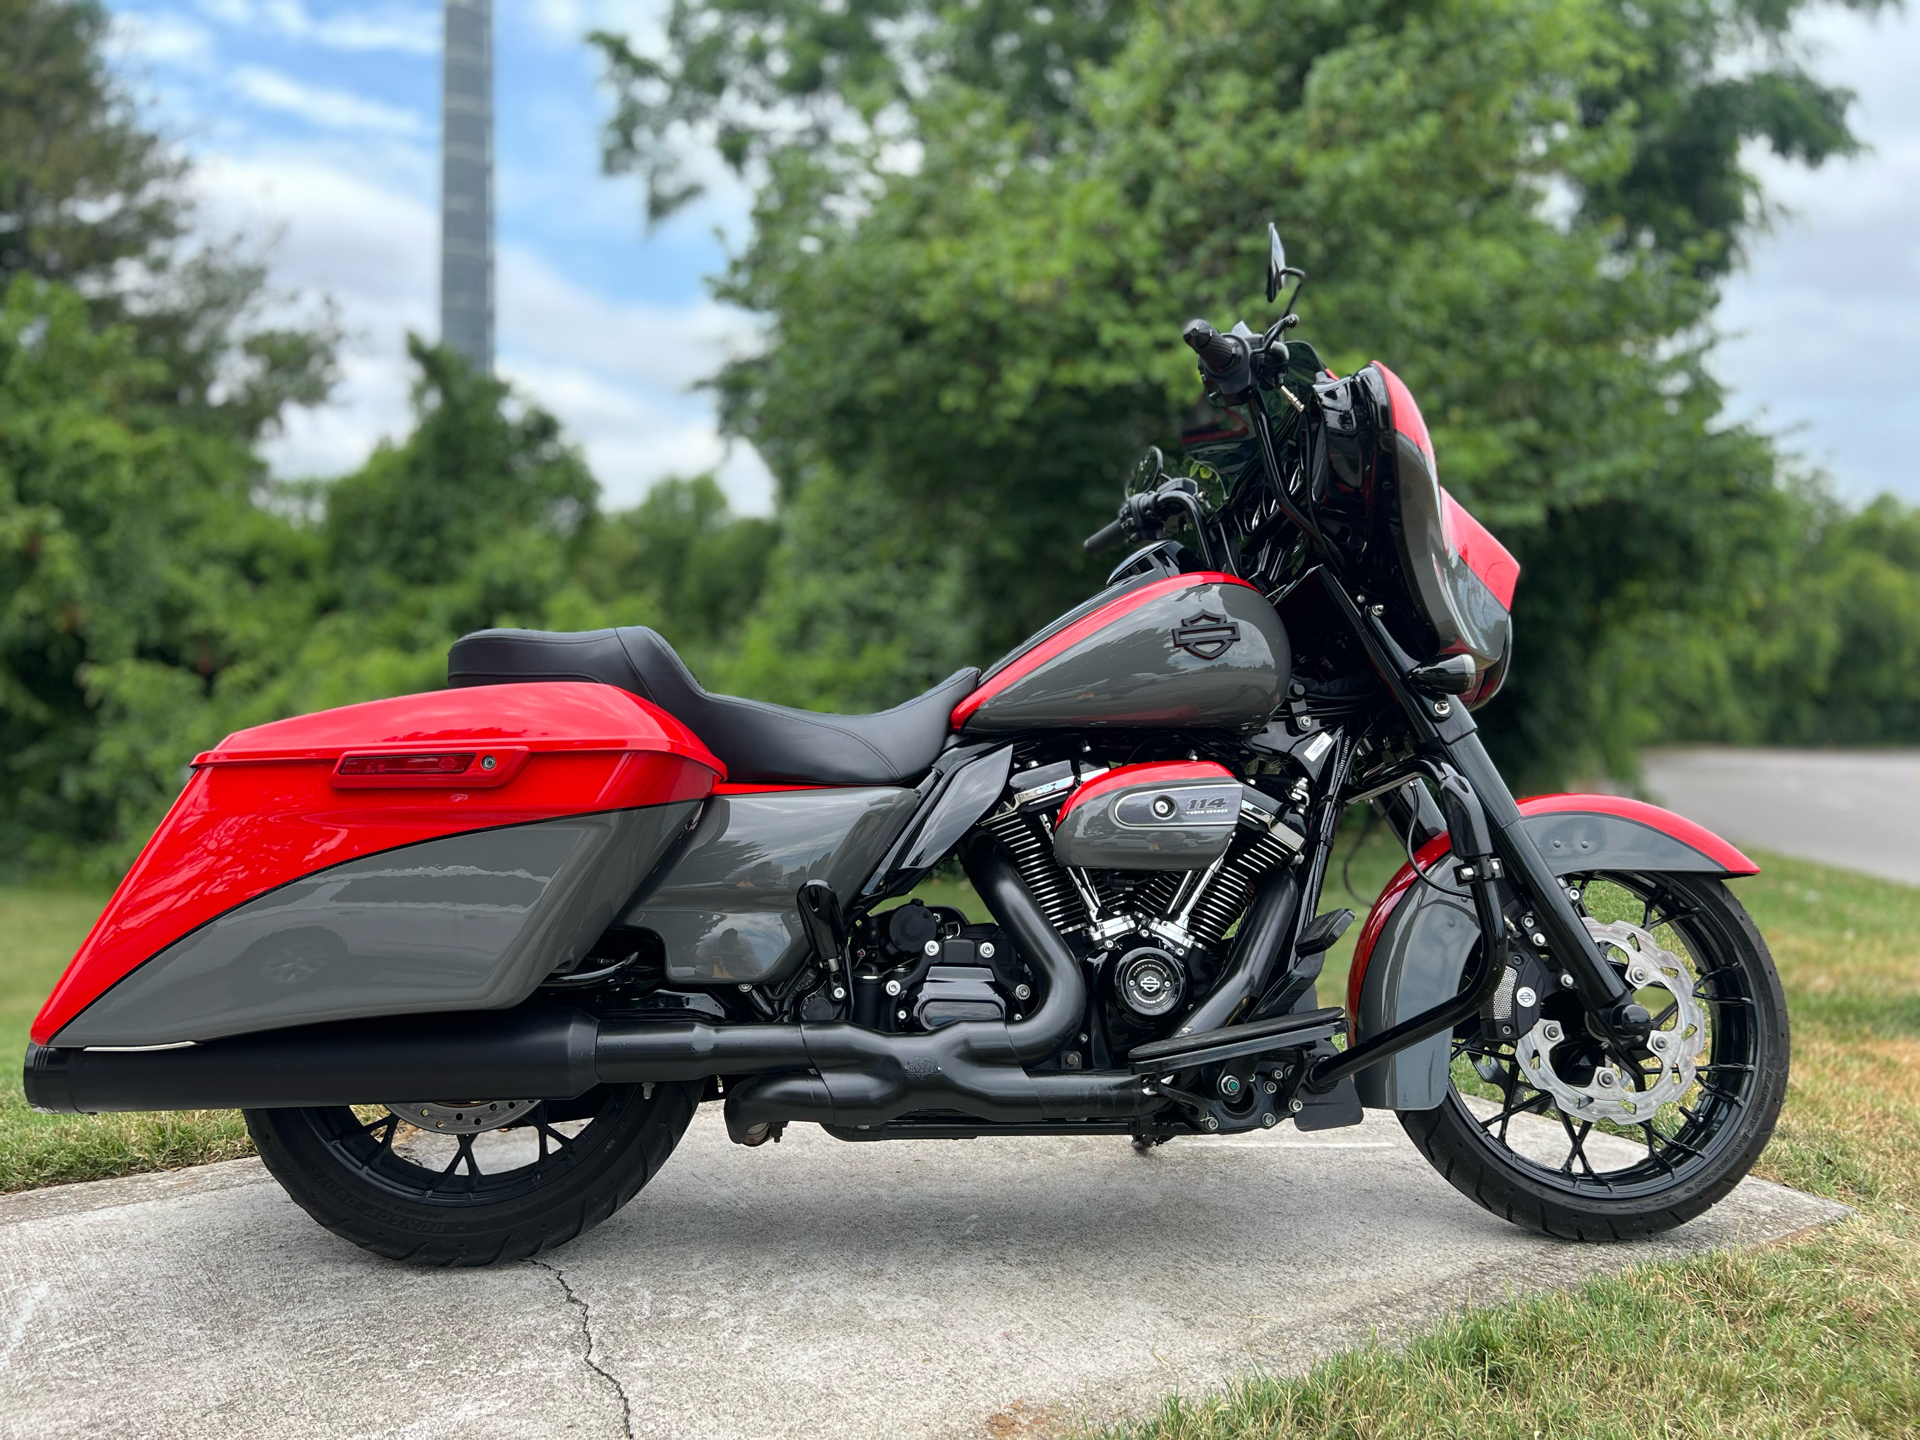 2020 Harley-Davidson Street Glide® Special in Franklin, Tennessee - Photo 1